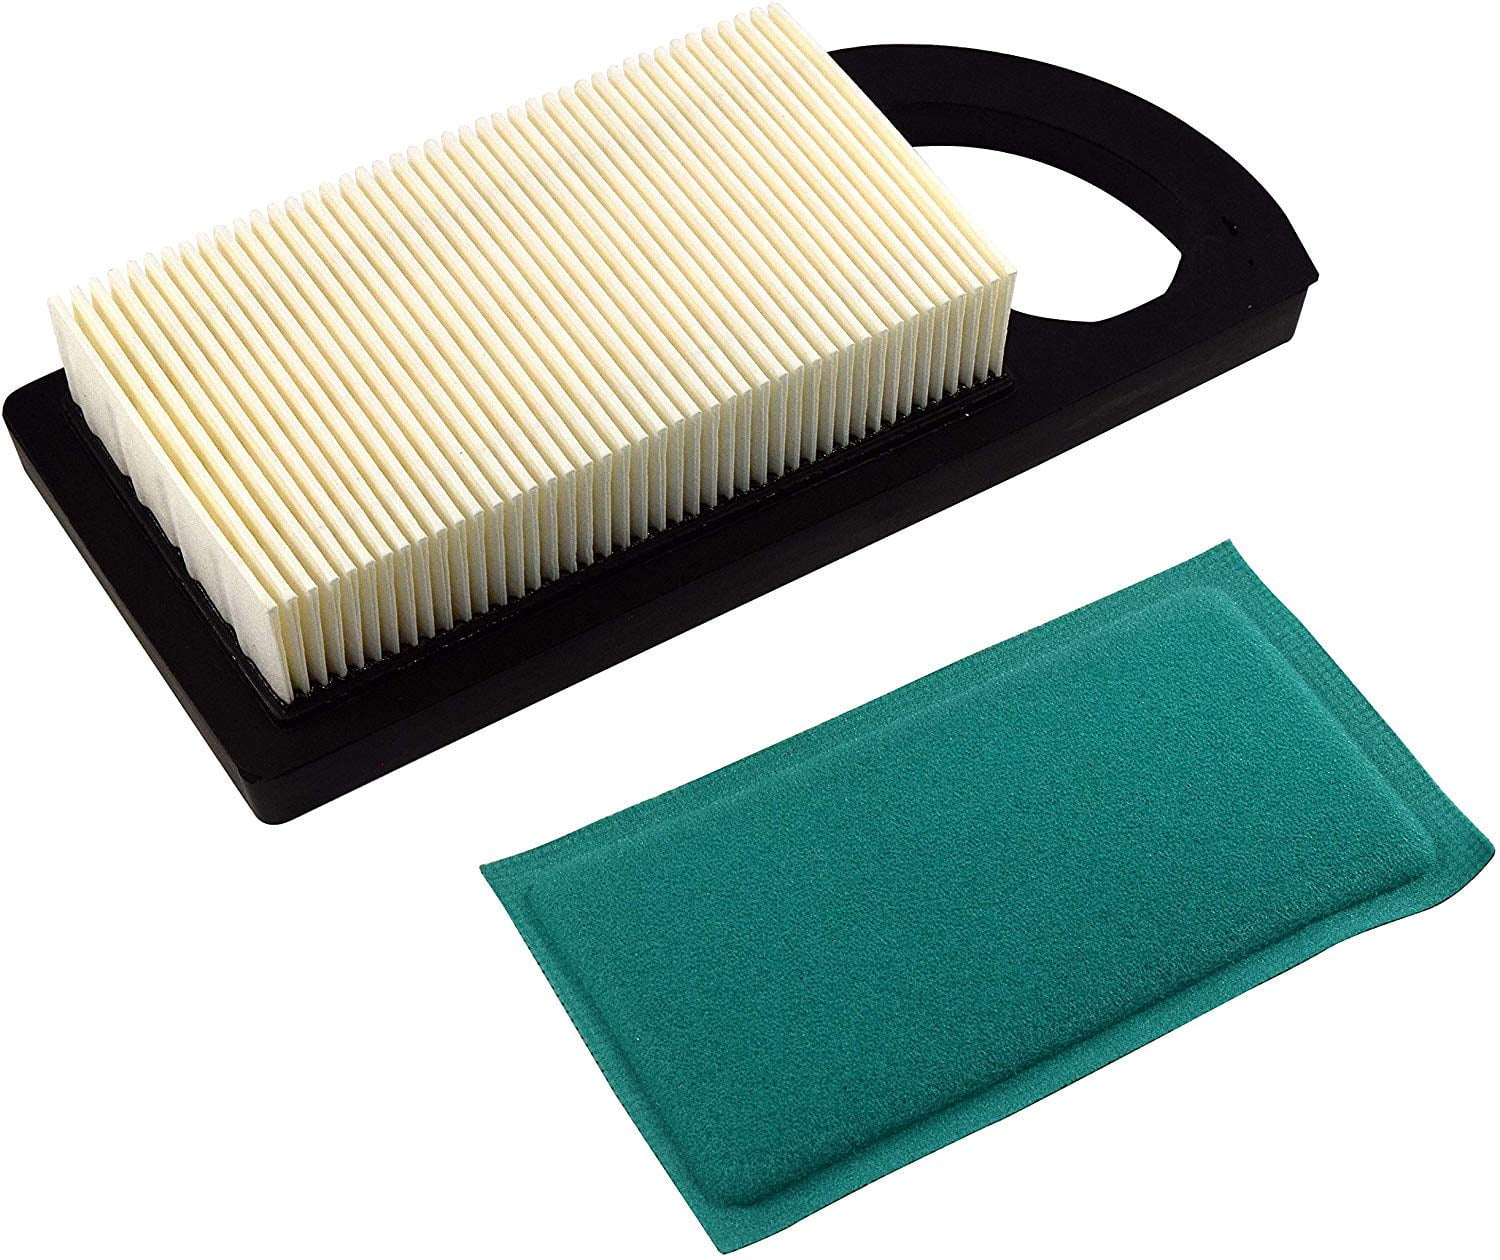 Air filter kit for Briggs & Stratton 697152 698413 797007 697775 650821 